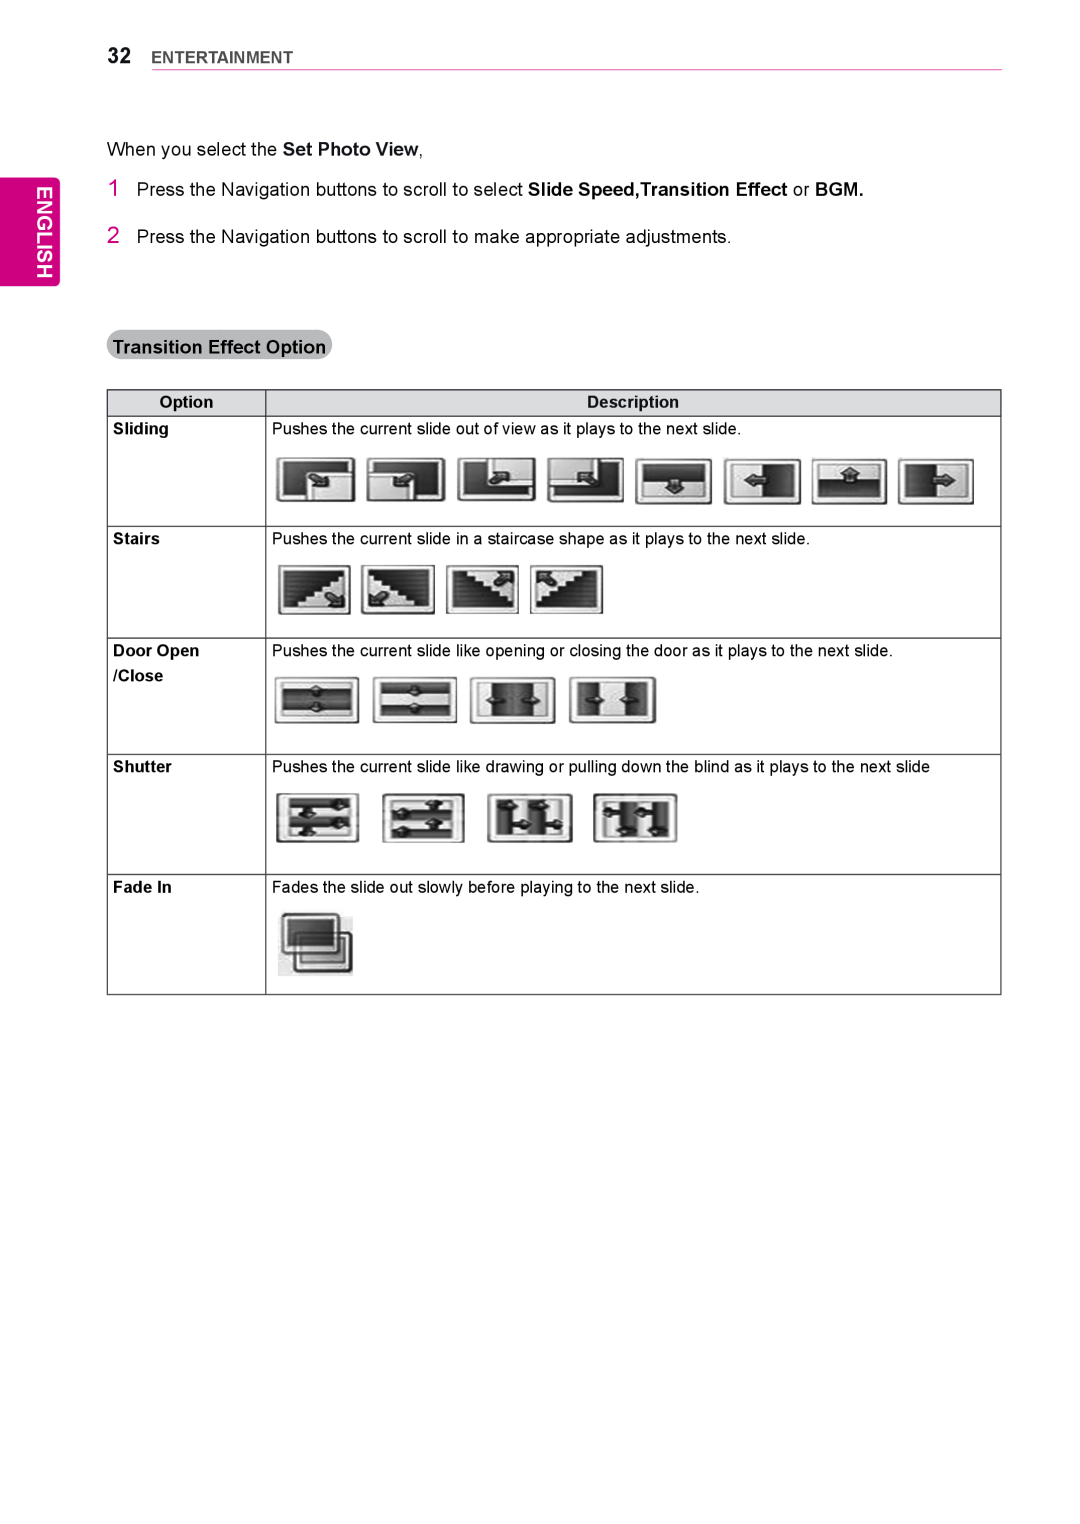 LG Electronics 55WS10, 42WS10, 47WS10 owner manual English, Transition Effect Option, Entertainment 